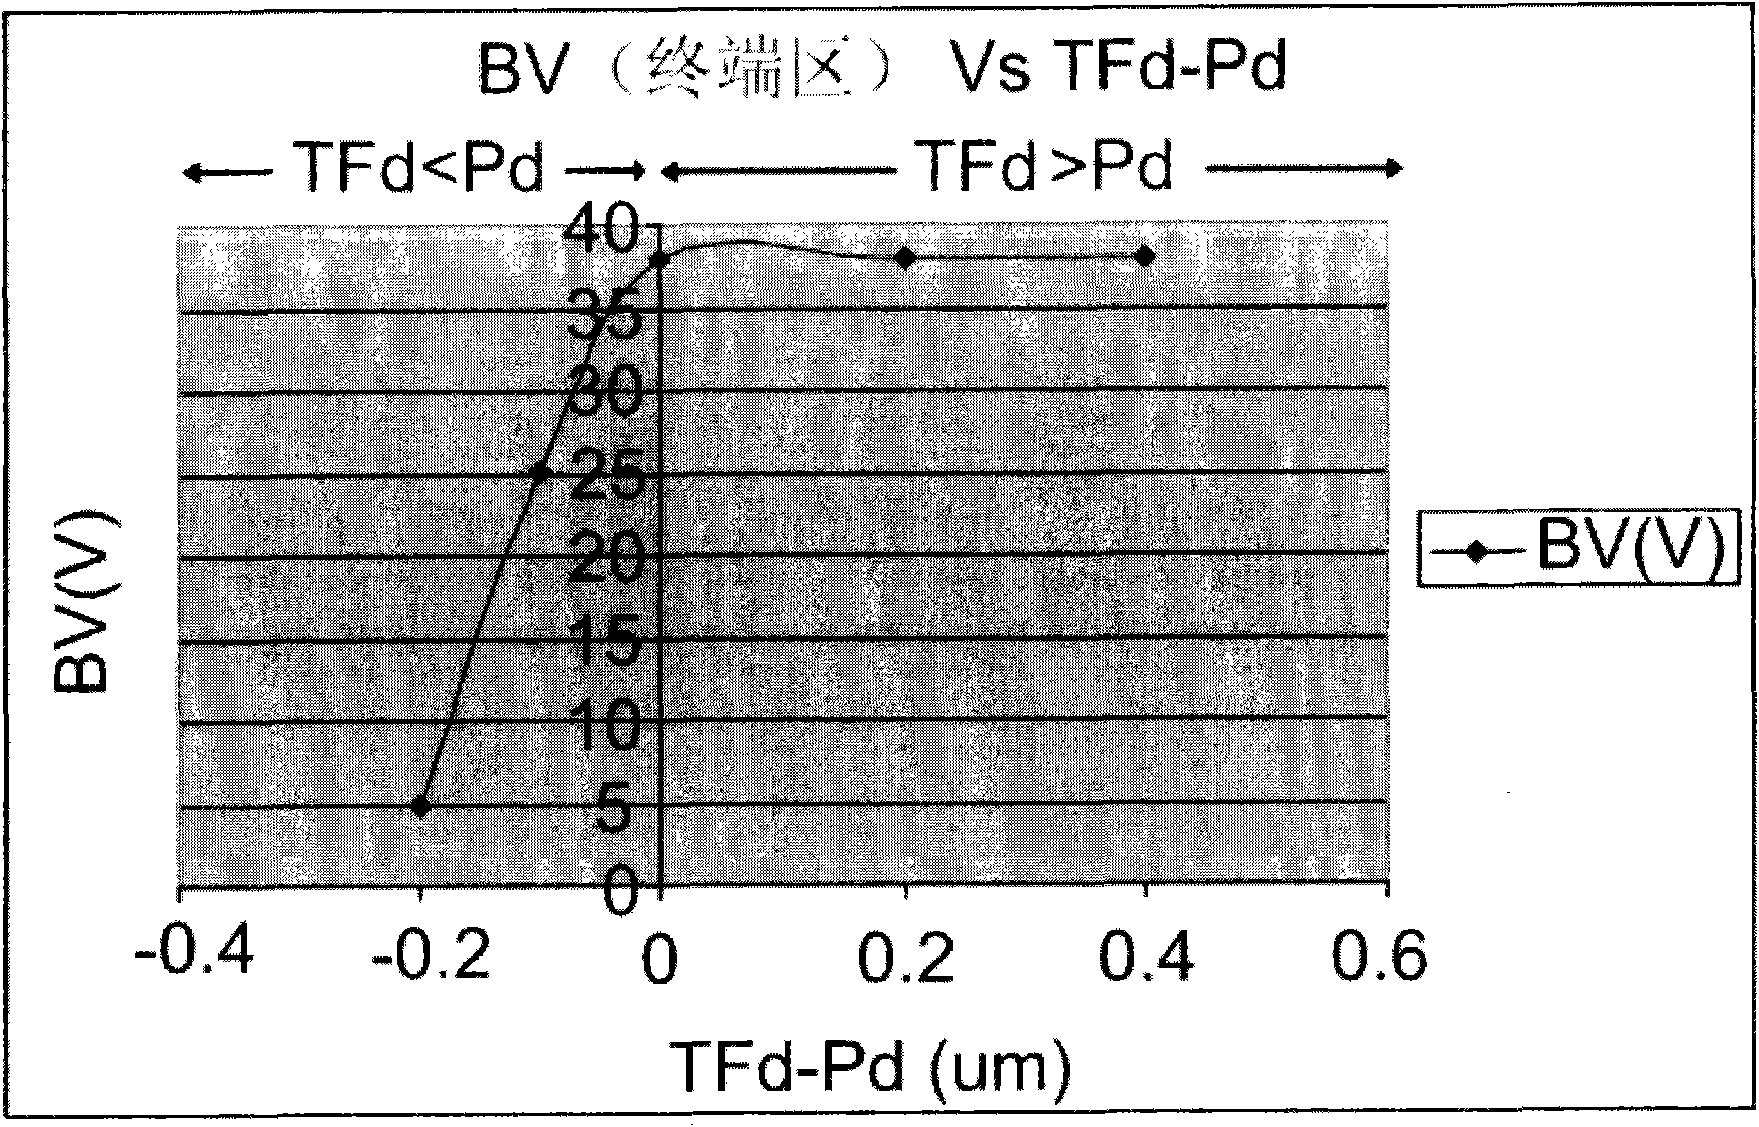 Groove metal-oxide semiconductor field effect transistor and manufacture method thereof